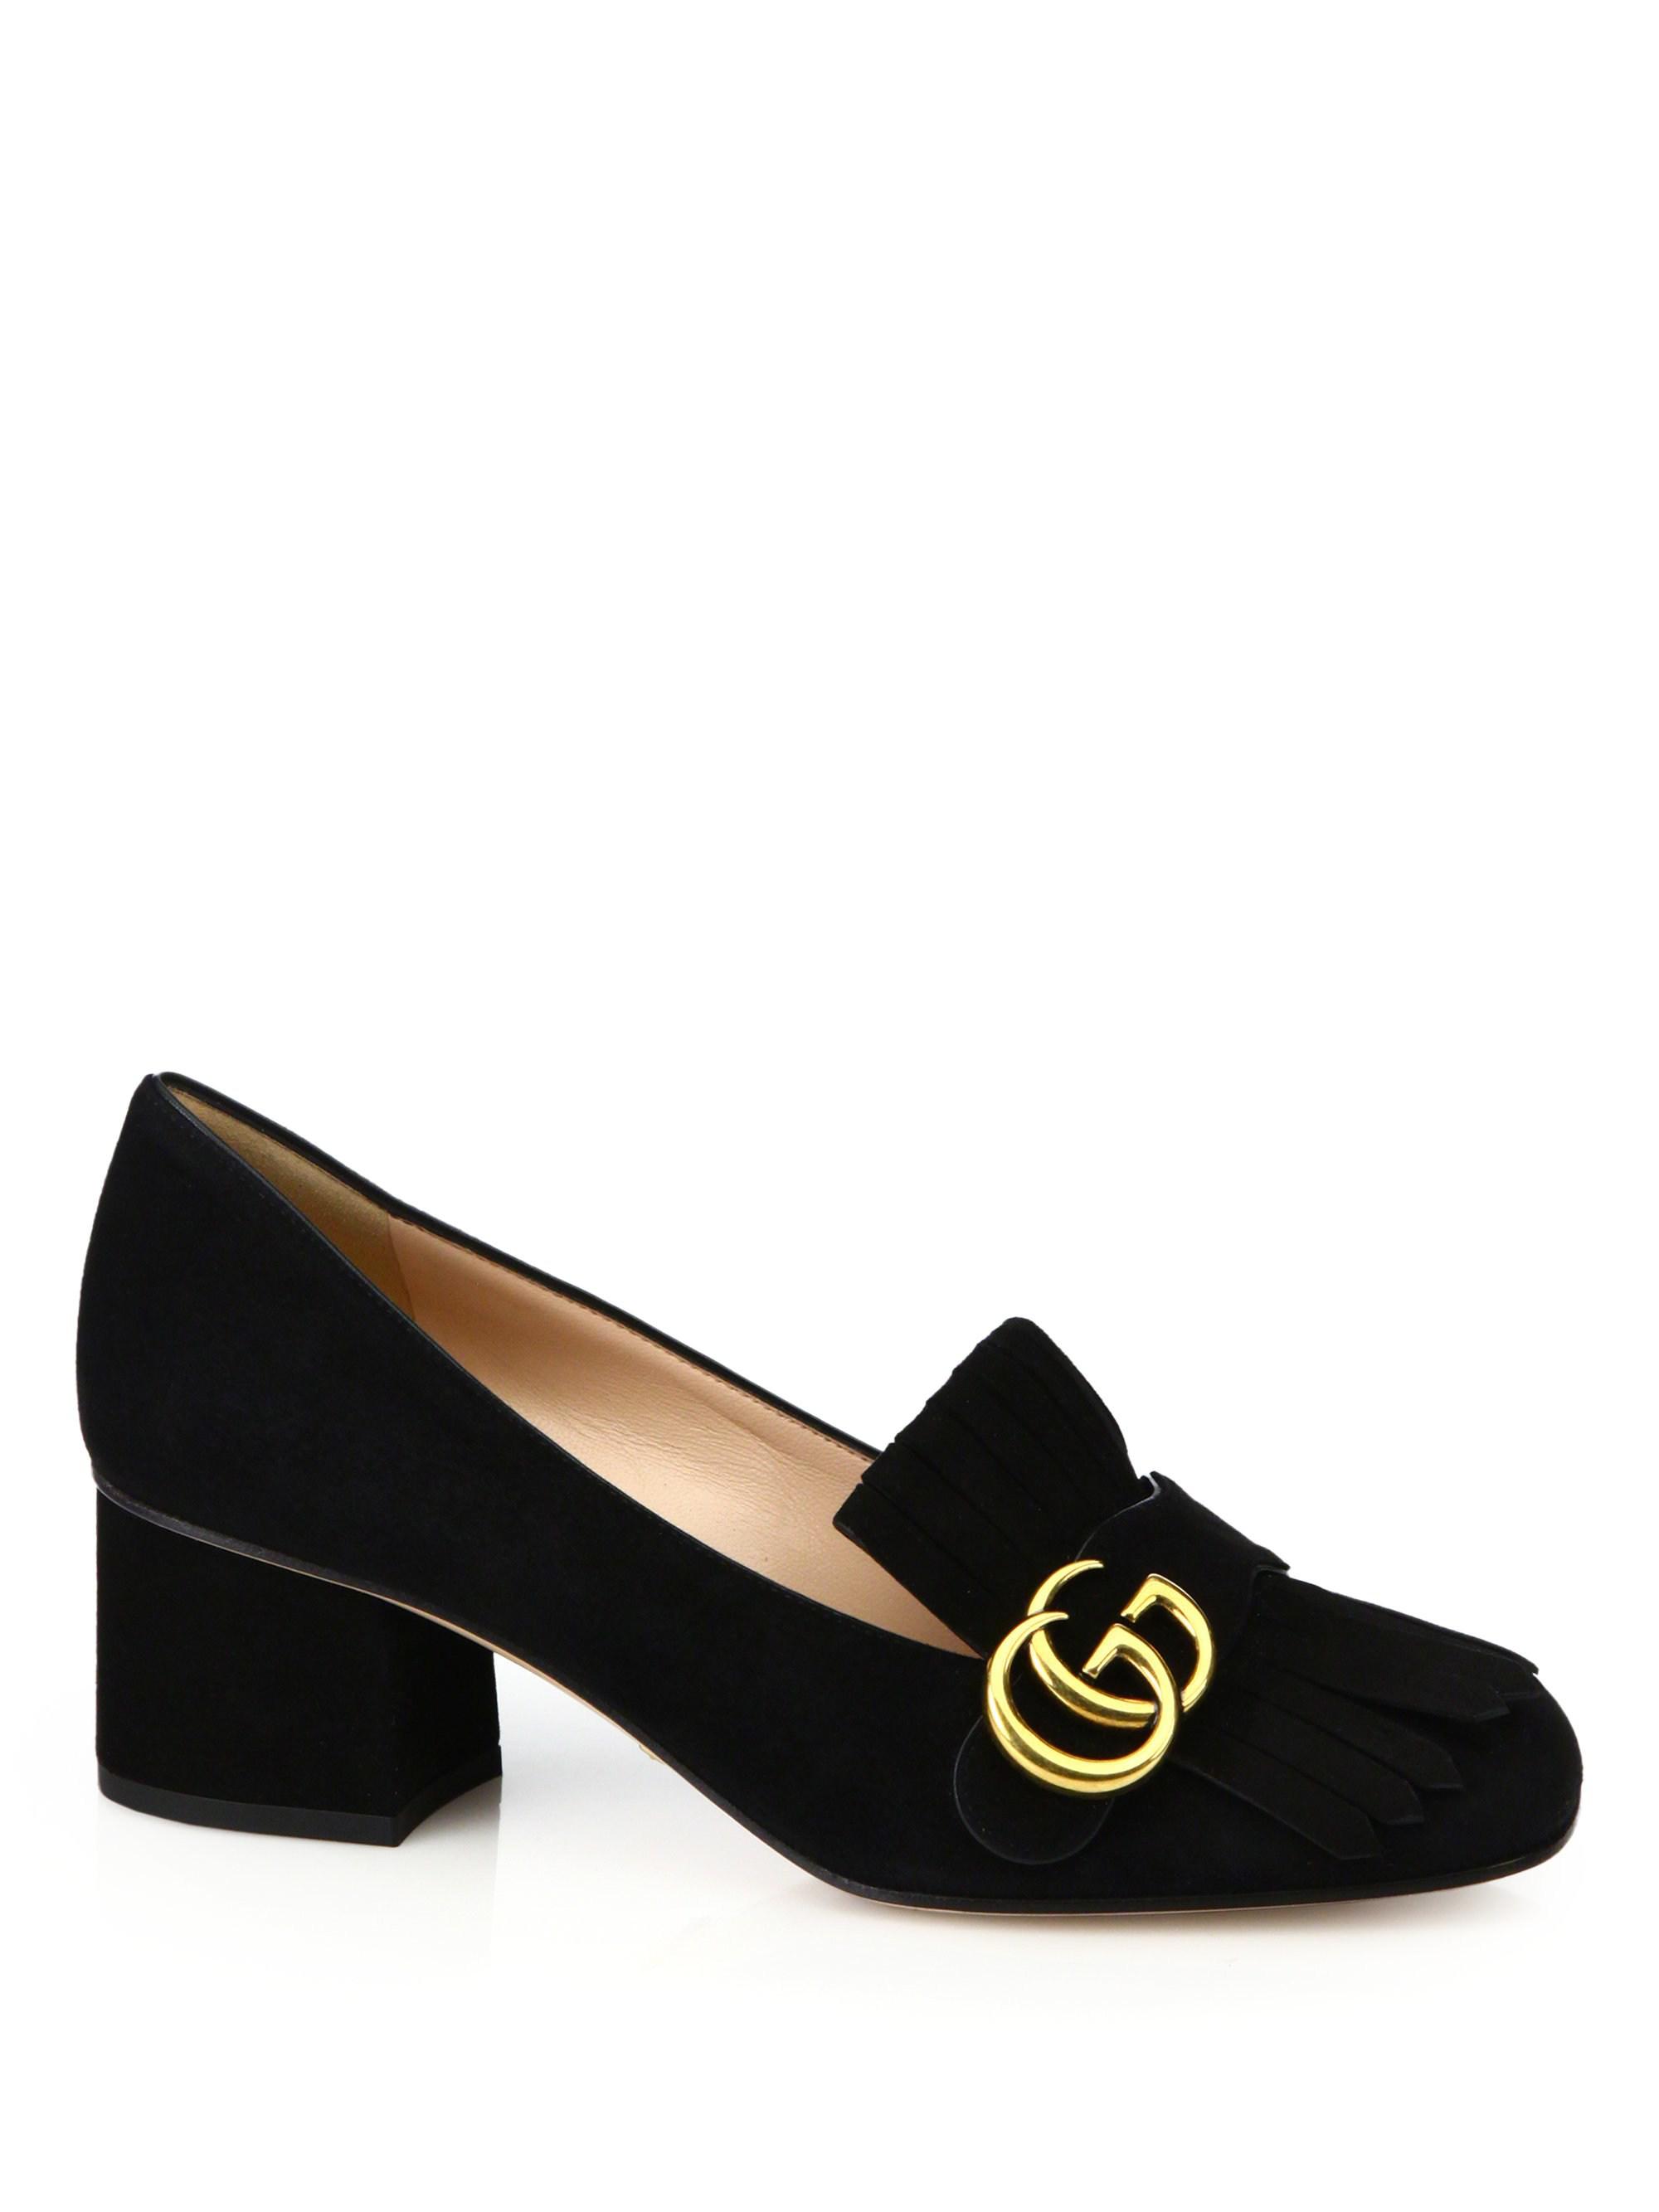 Gucci Marmont Leather Pumps in Black Leather (Purple) - Save 84% - Lyst